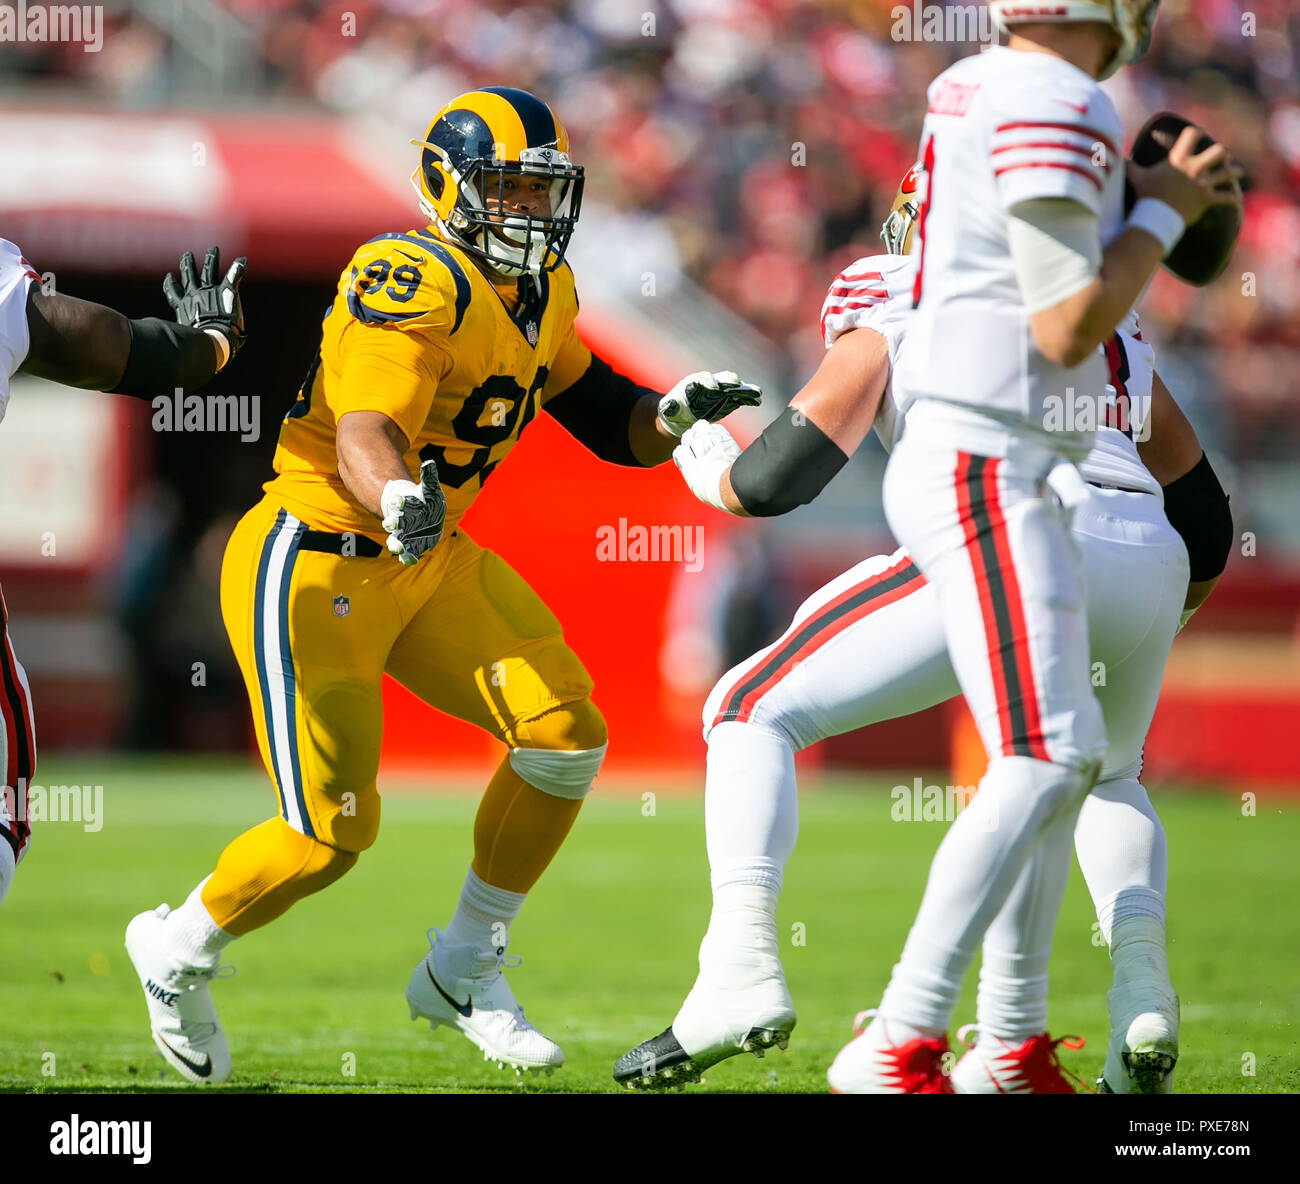 Santa Clara, CA. 21st Oct, 2018. Los Angeles Rams defensive tackle Aaron Donald (99) in action during the NFL football game between the Los Angeles Rams and the San Francisco 49ers at Levi's Stadium in Santa Clara, CA. The Rams defeated the 49ers 39-10. Damon Tarver/Cal Sport Media/Alamy Live News Stock Photo